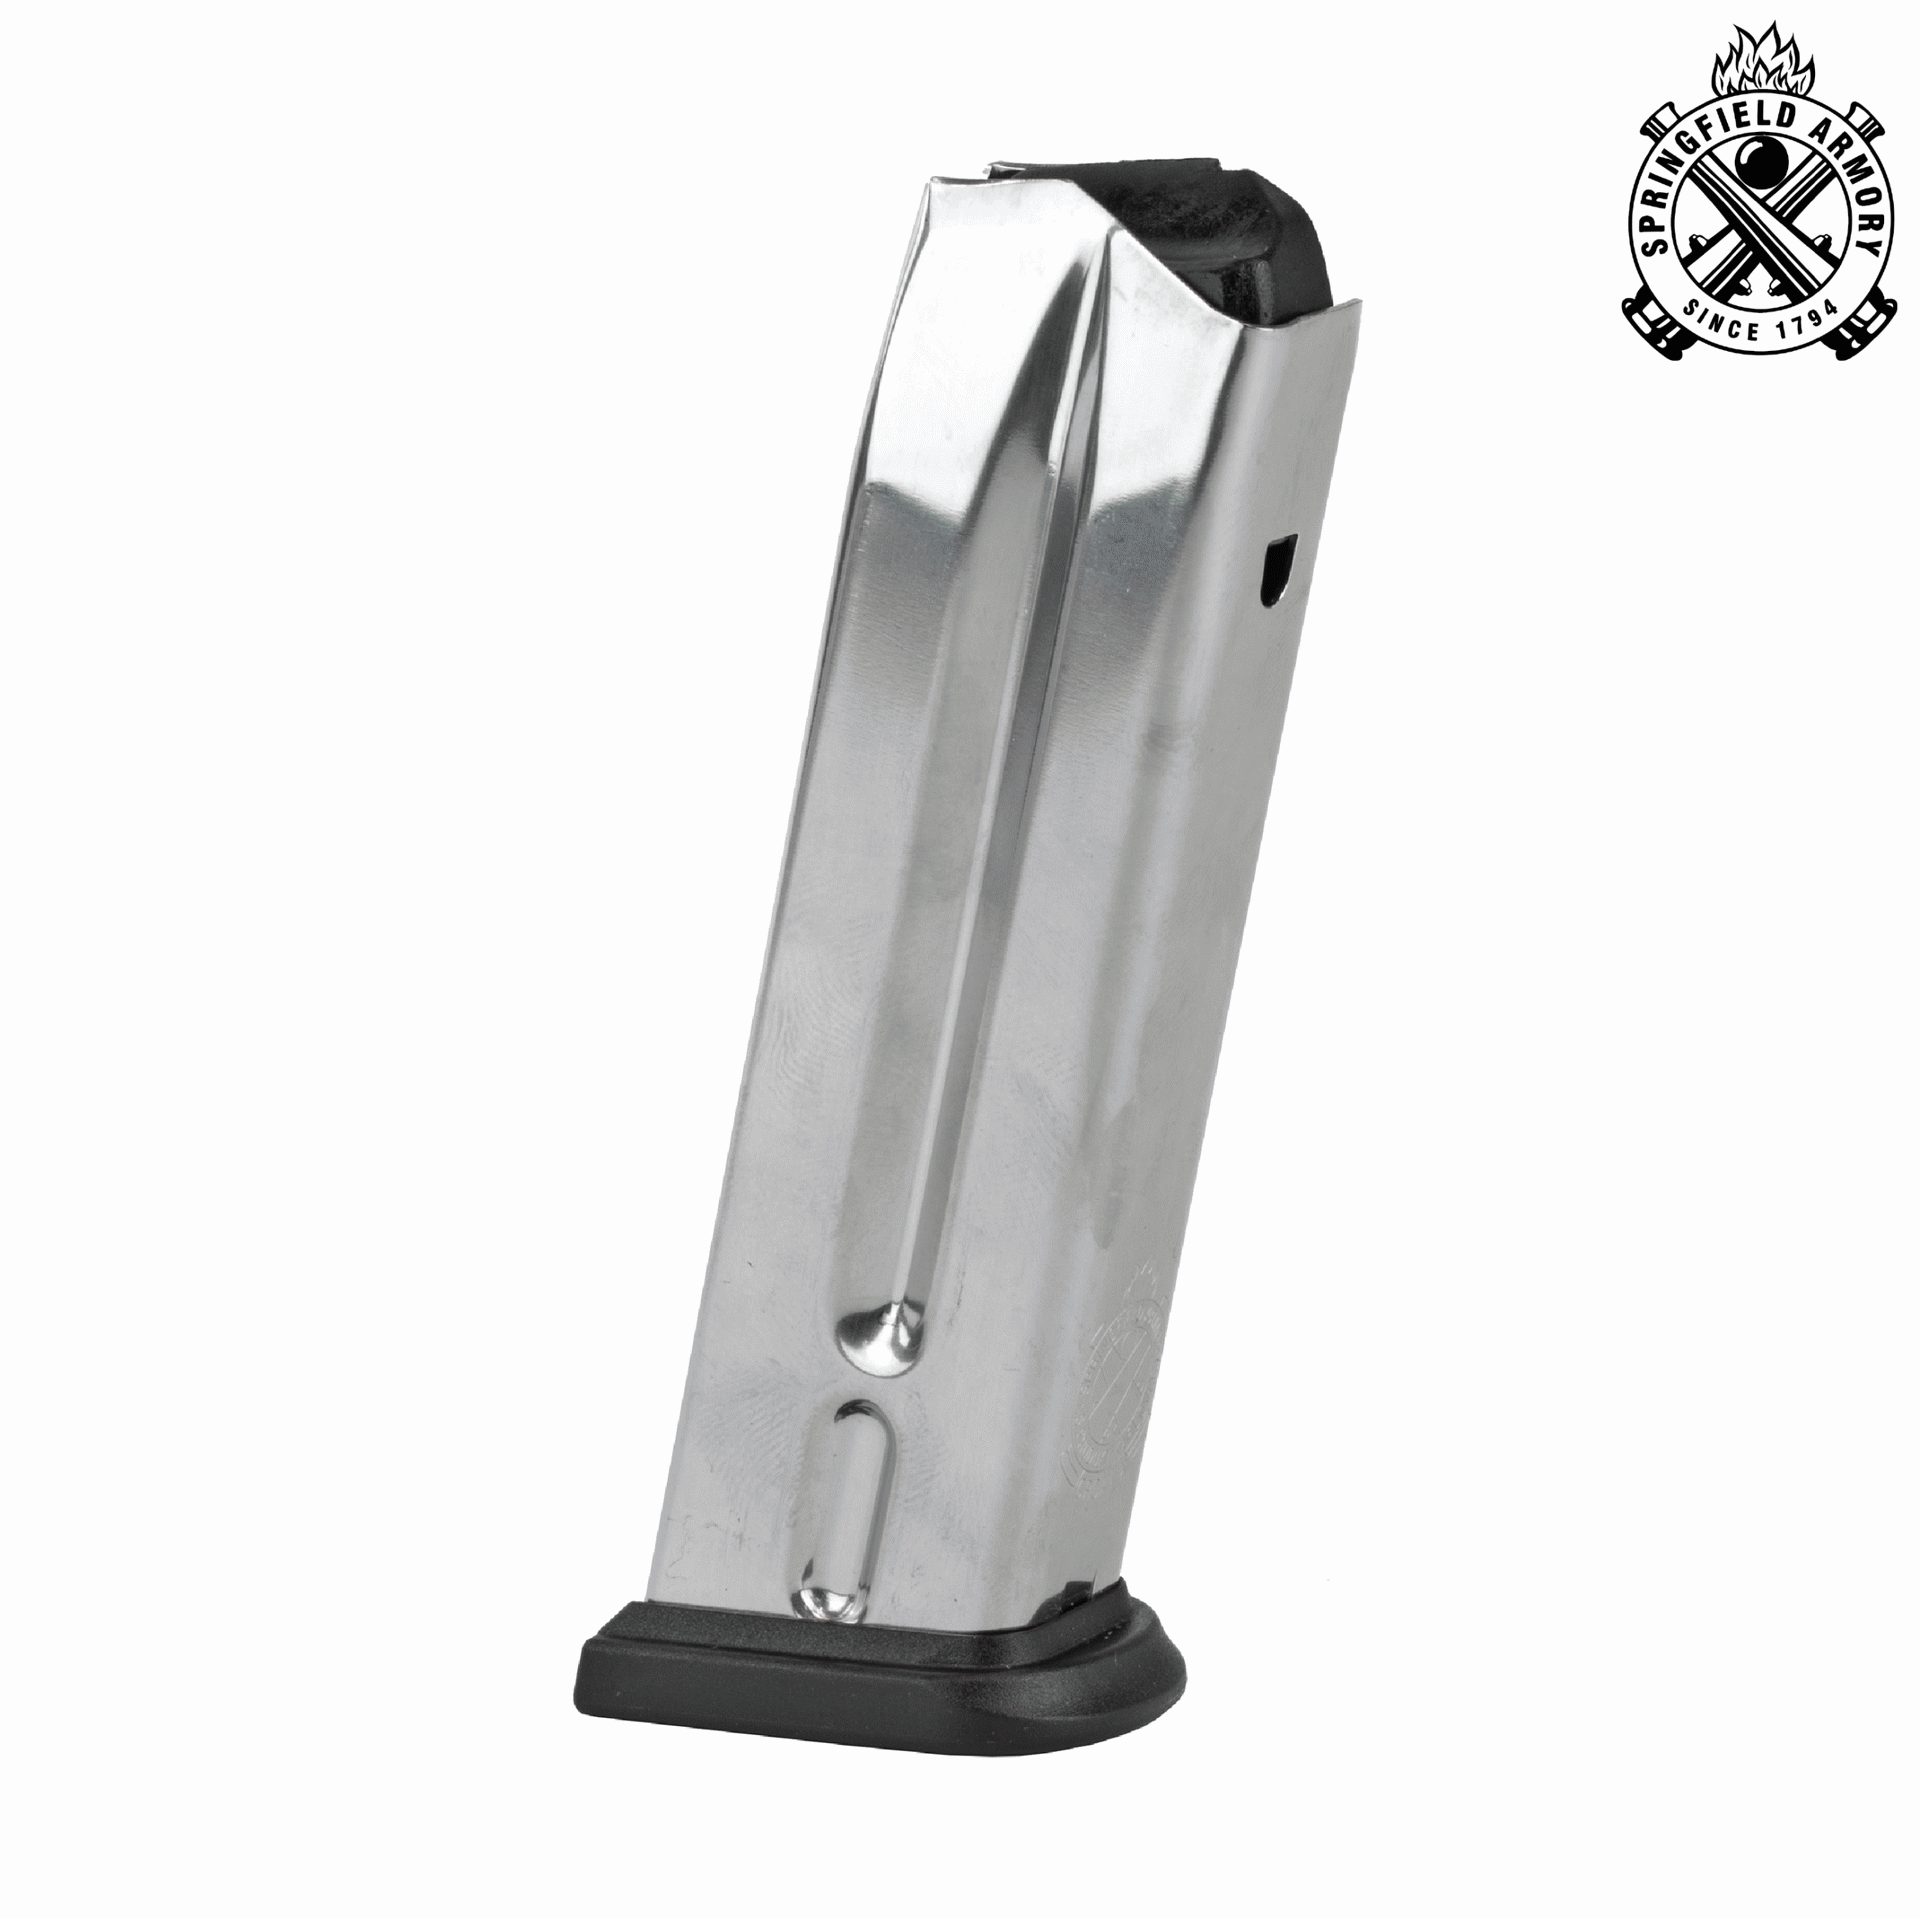 10rd Magazines for Springfield Xds-9-9mm Mags Clips for sale online 